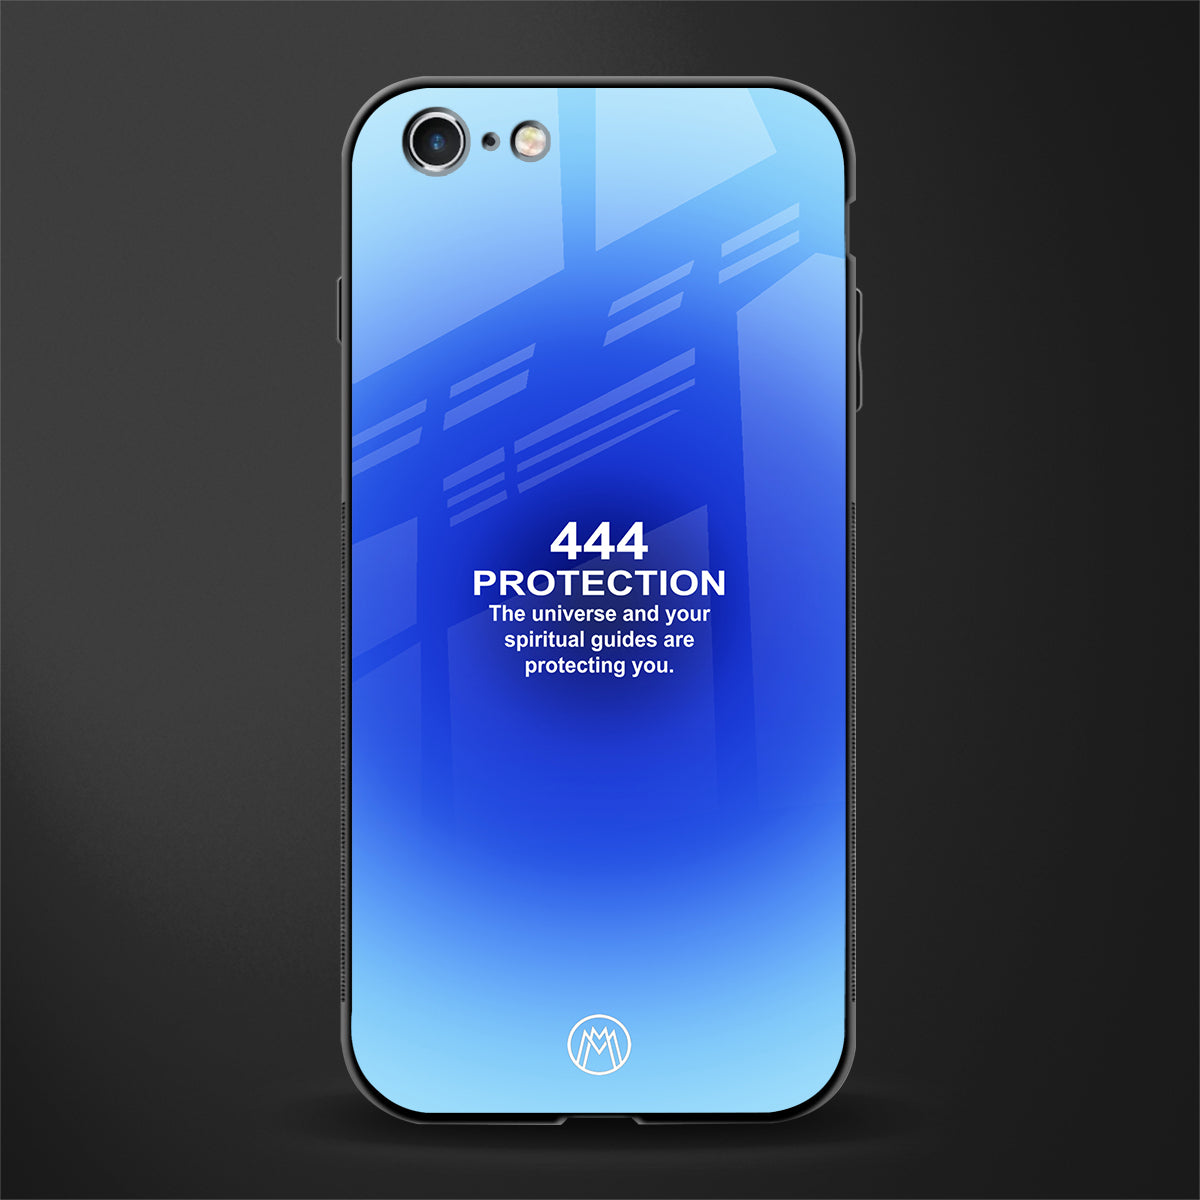 444 protection glass case for iphone 6 plus image